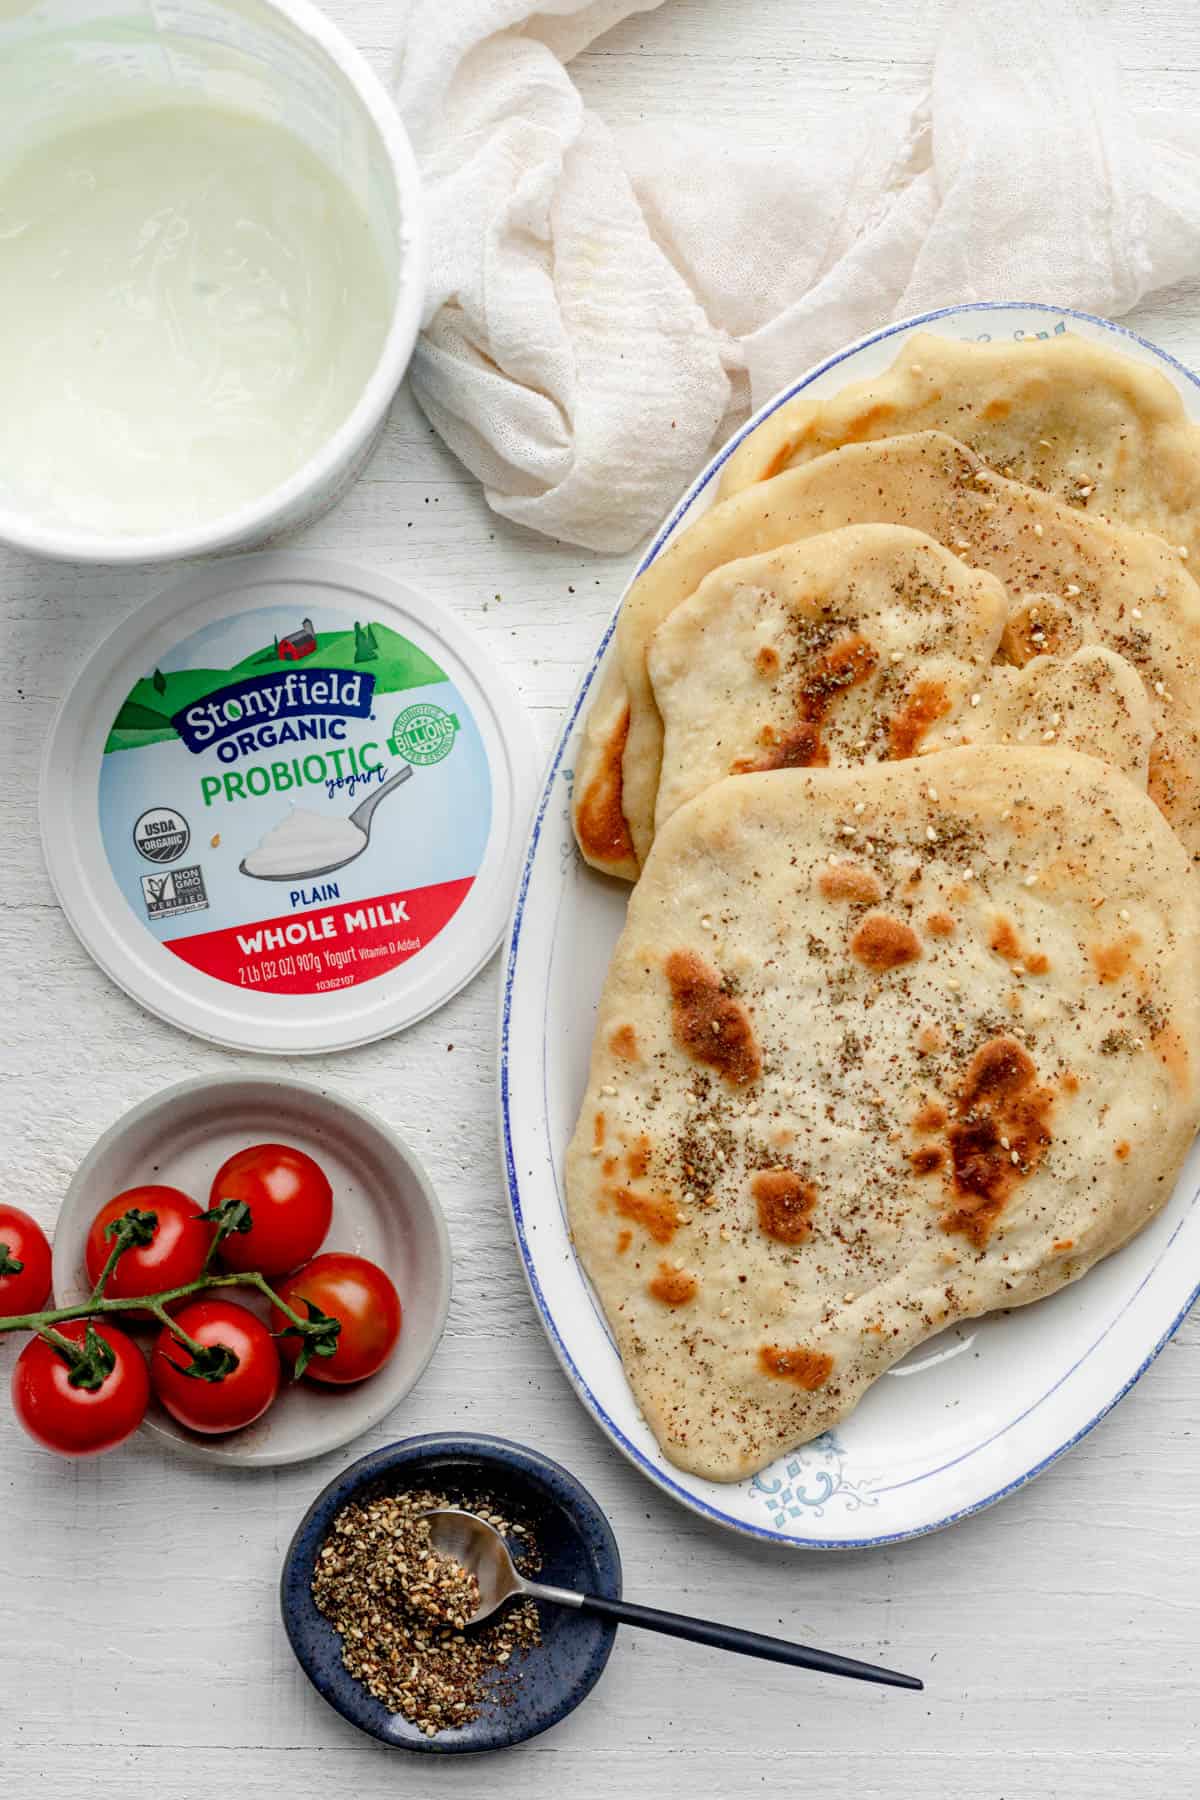 Serving plate with flatbread and open container of Stonyfield yogurt next to it